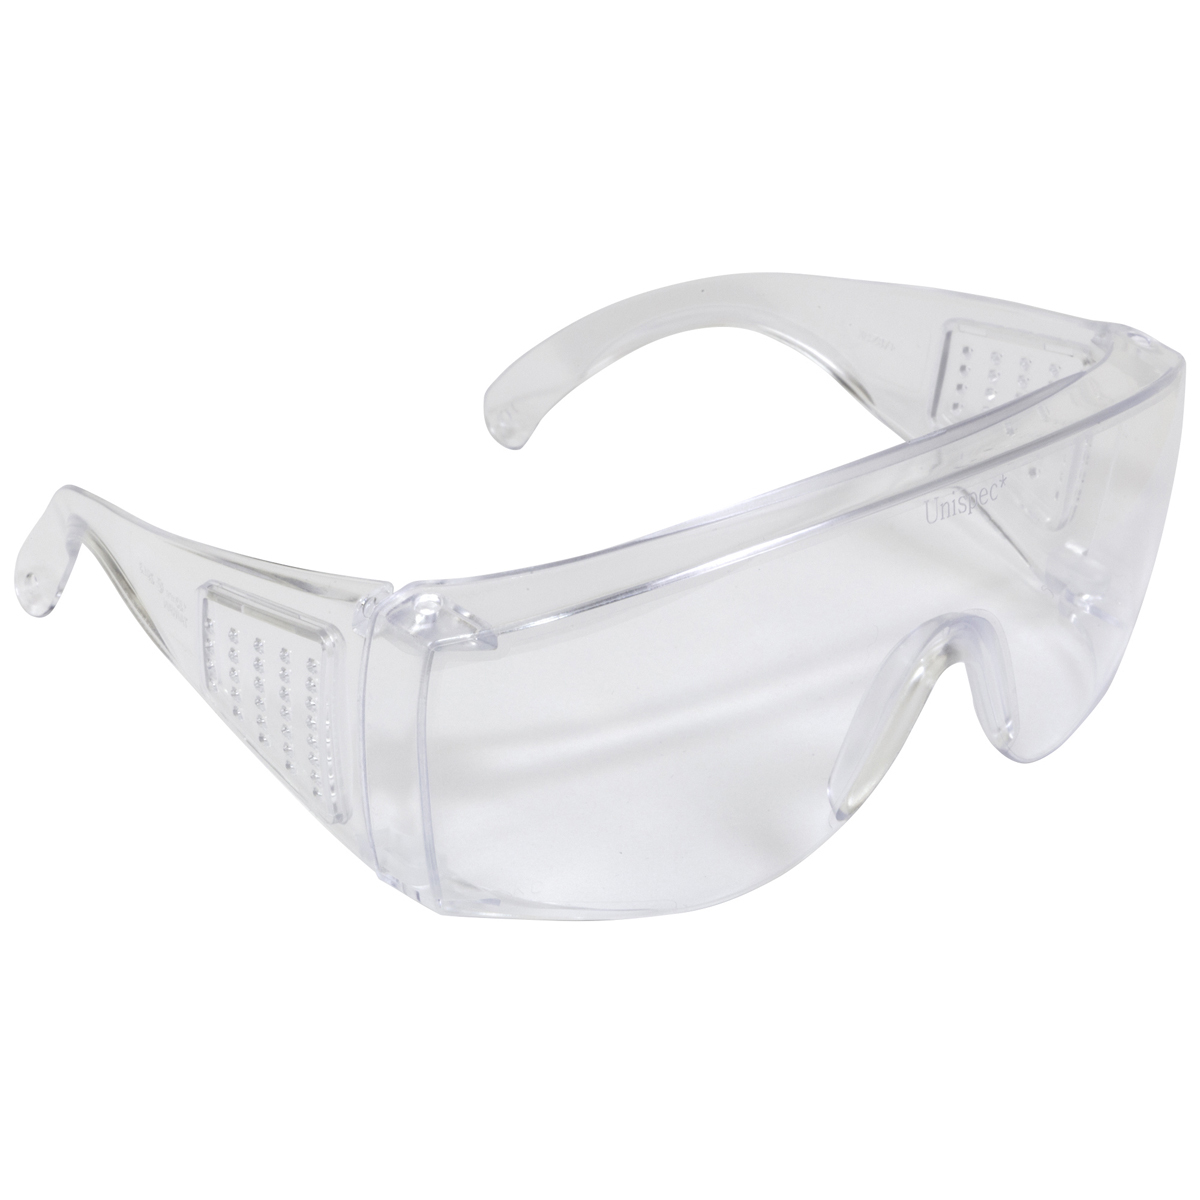 Kimberly-Clark Professional* KleenGuard™ Unispec* II Clear Safety Glasses With Clear Uncoated Lens (Availability restrictions ap